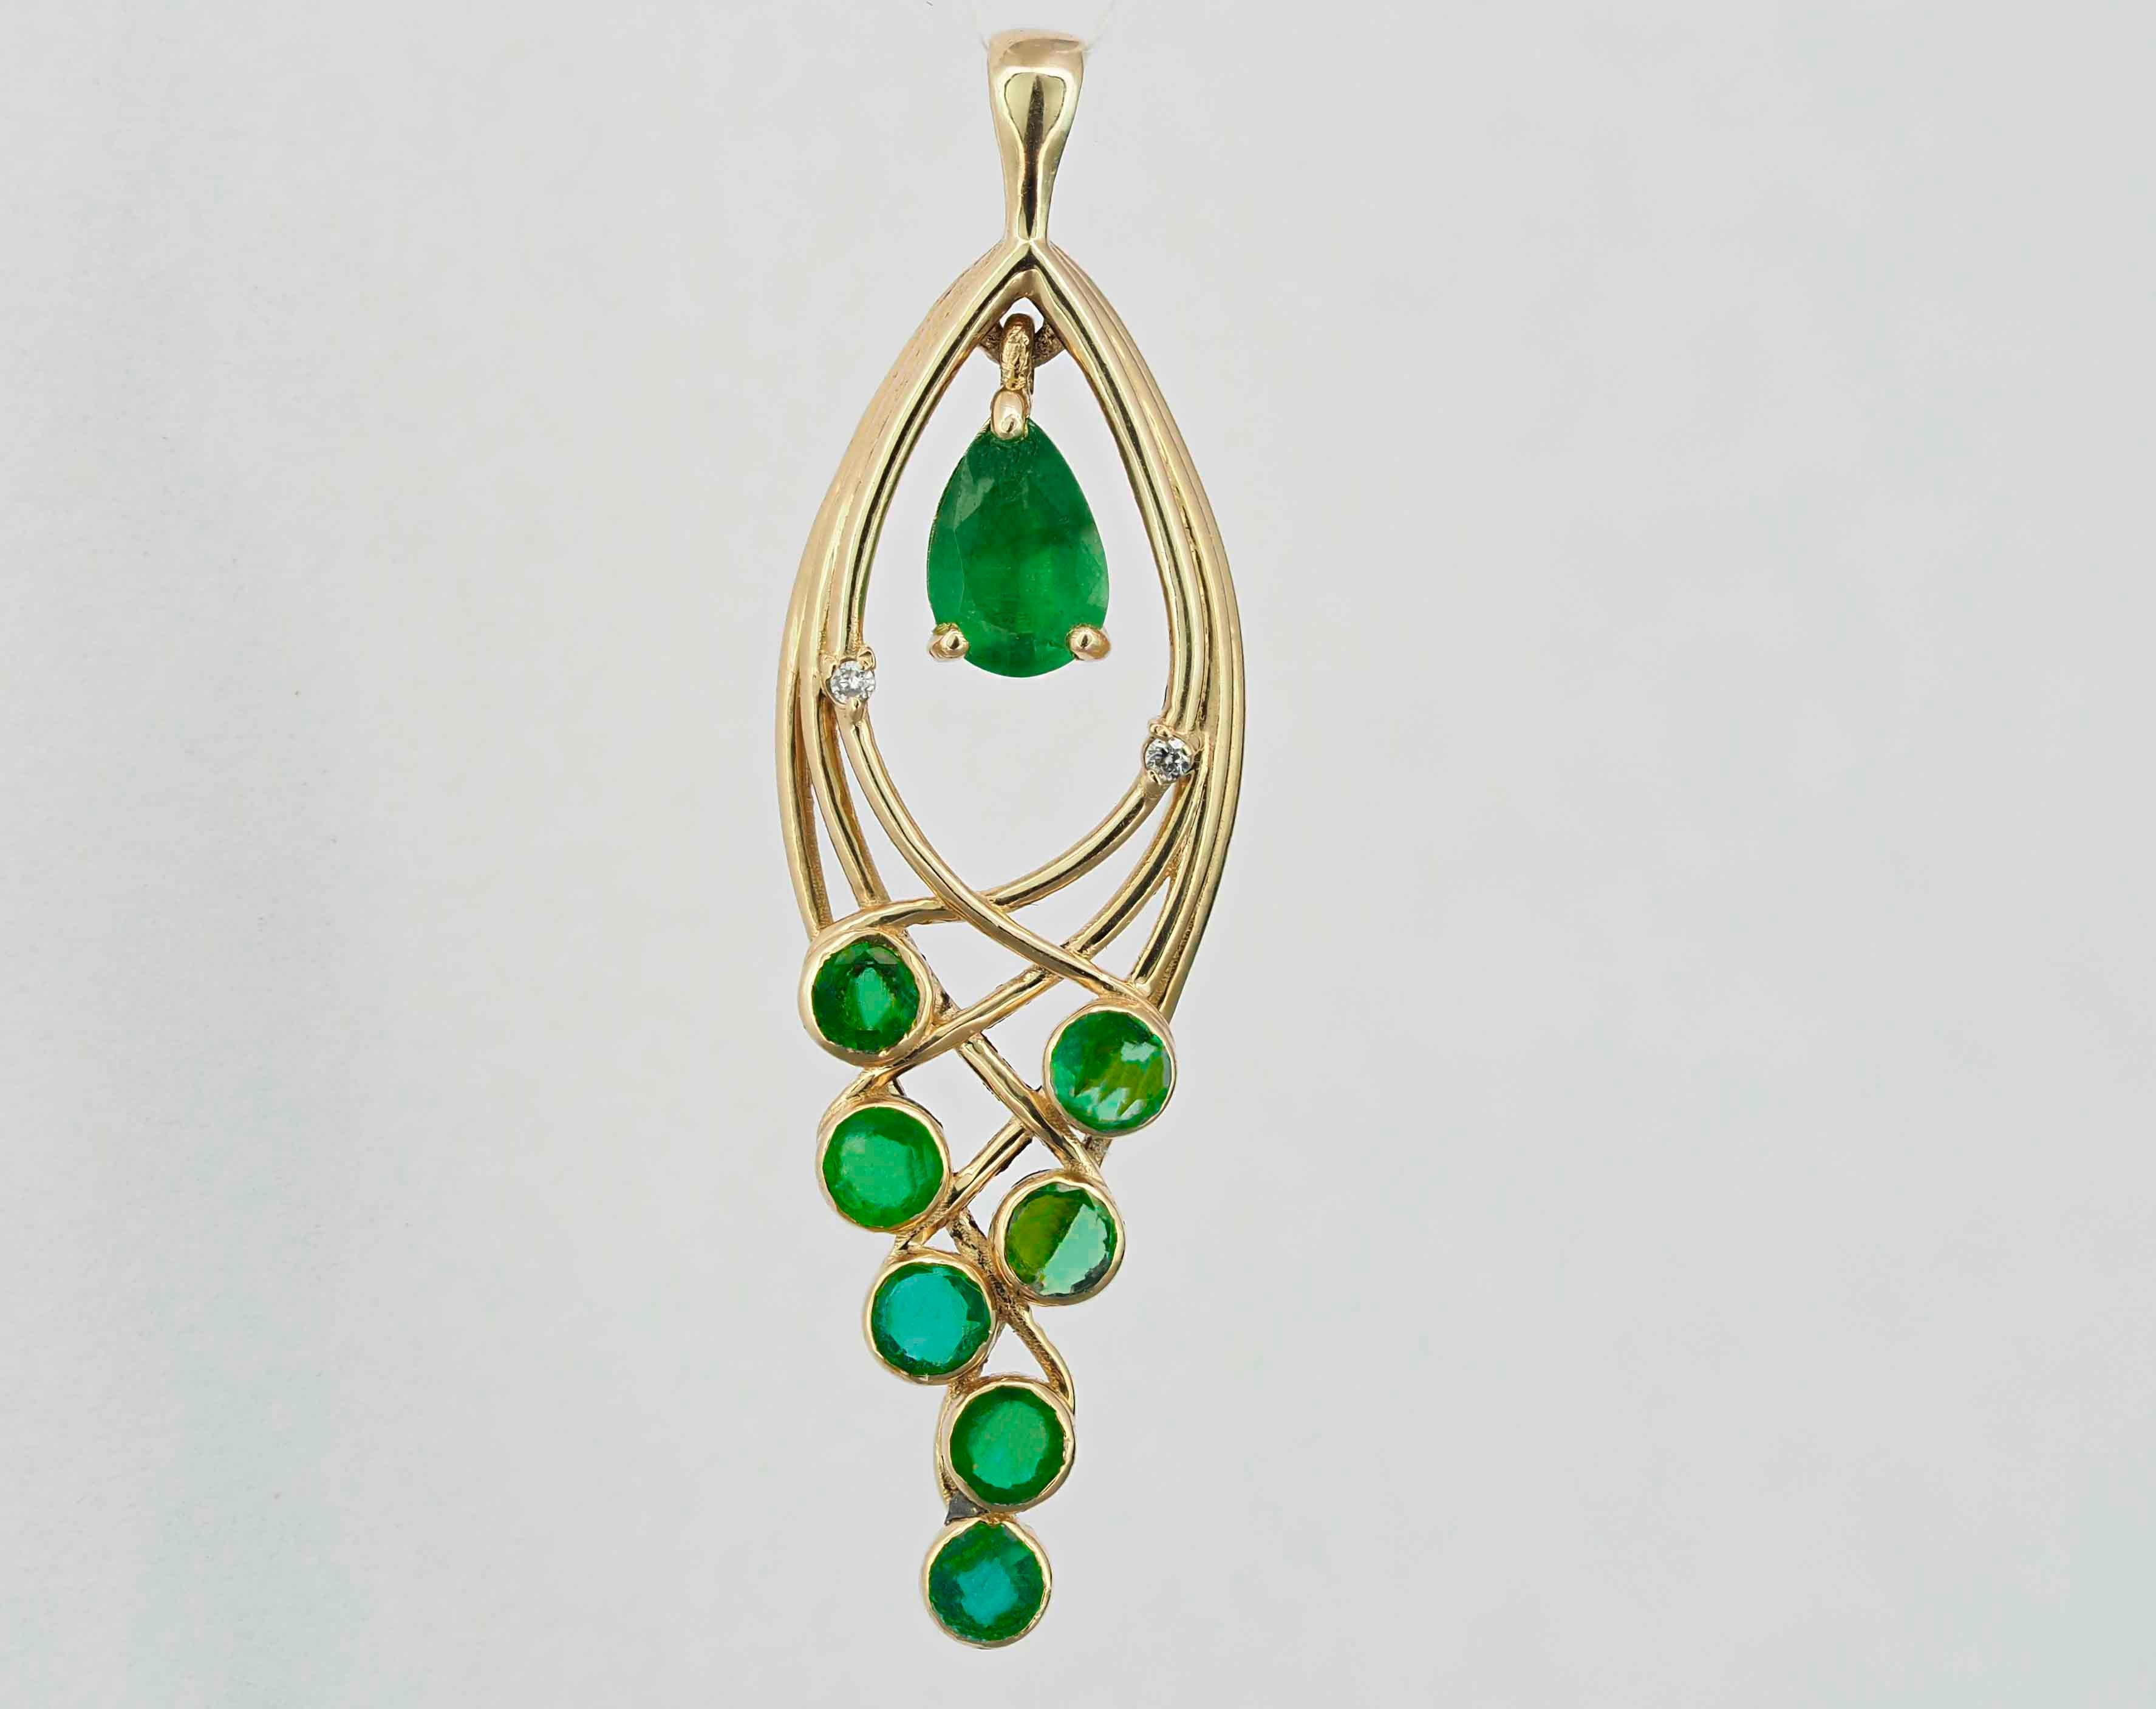 14k Gold Pendant with Emerald, Emeralds and Diamonds, Leaf Pendant For Sale 3